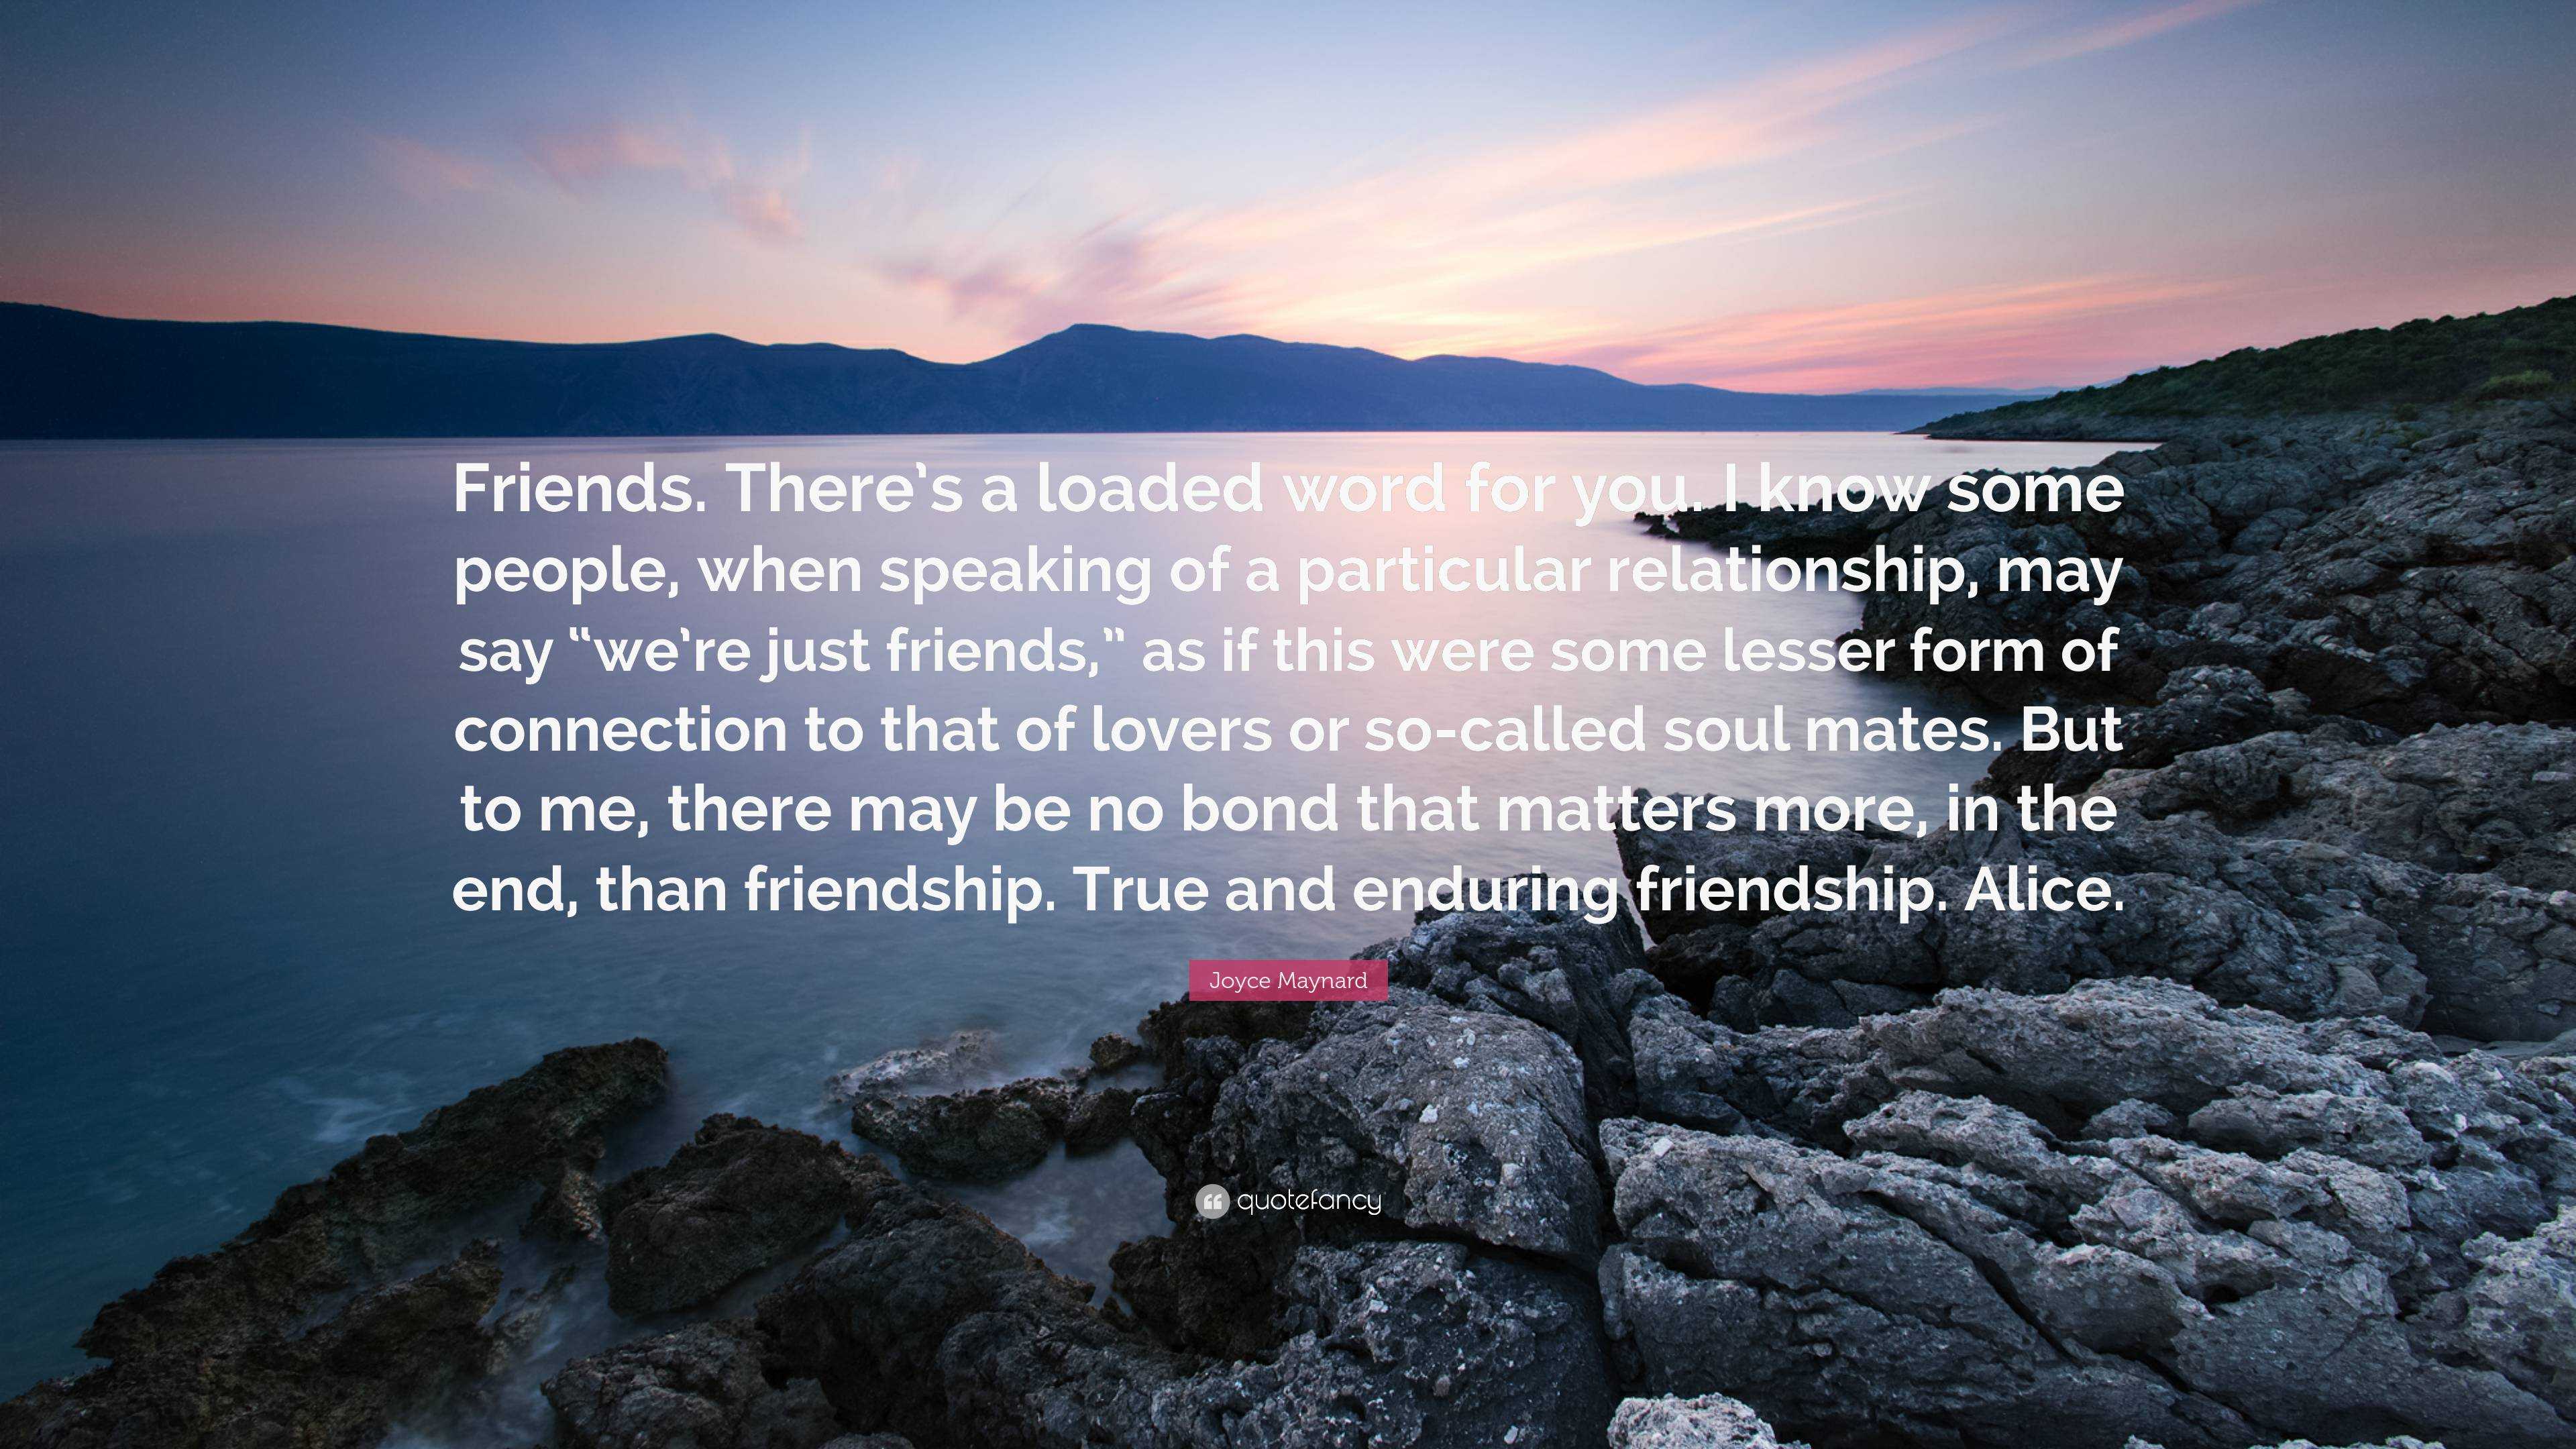 Joyce Maynard Quote: “Friends. There’s a loaded word for you. I know ...